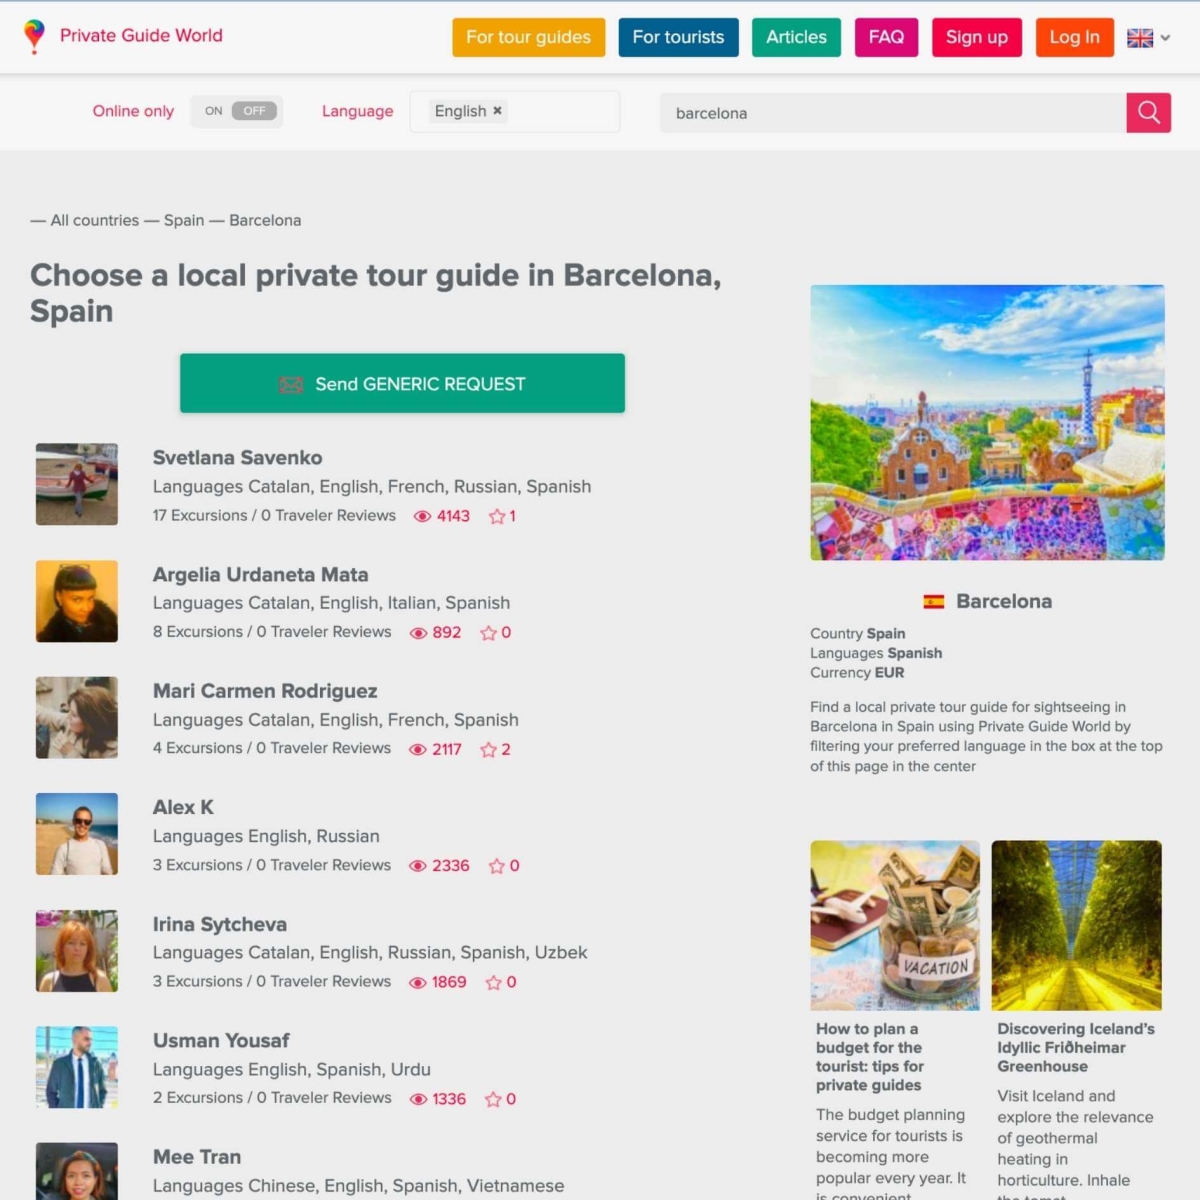 Local private tour guides in Barcelona on the Private Guide World platform at www.pg.world